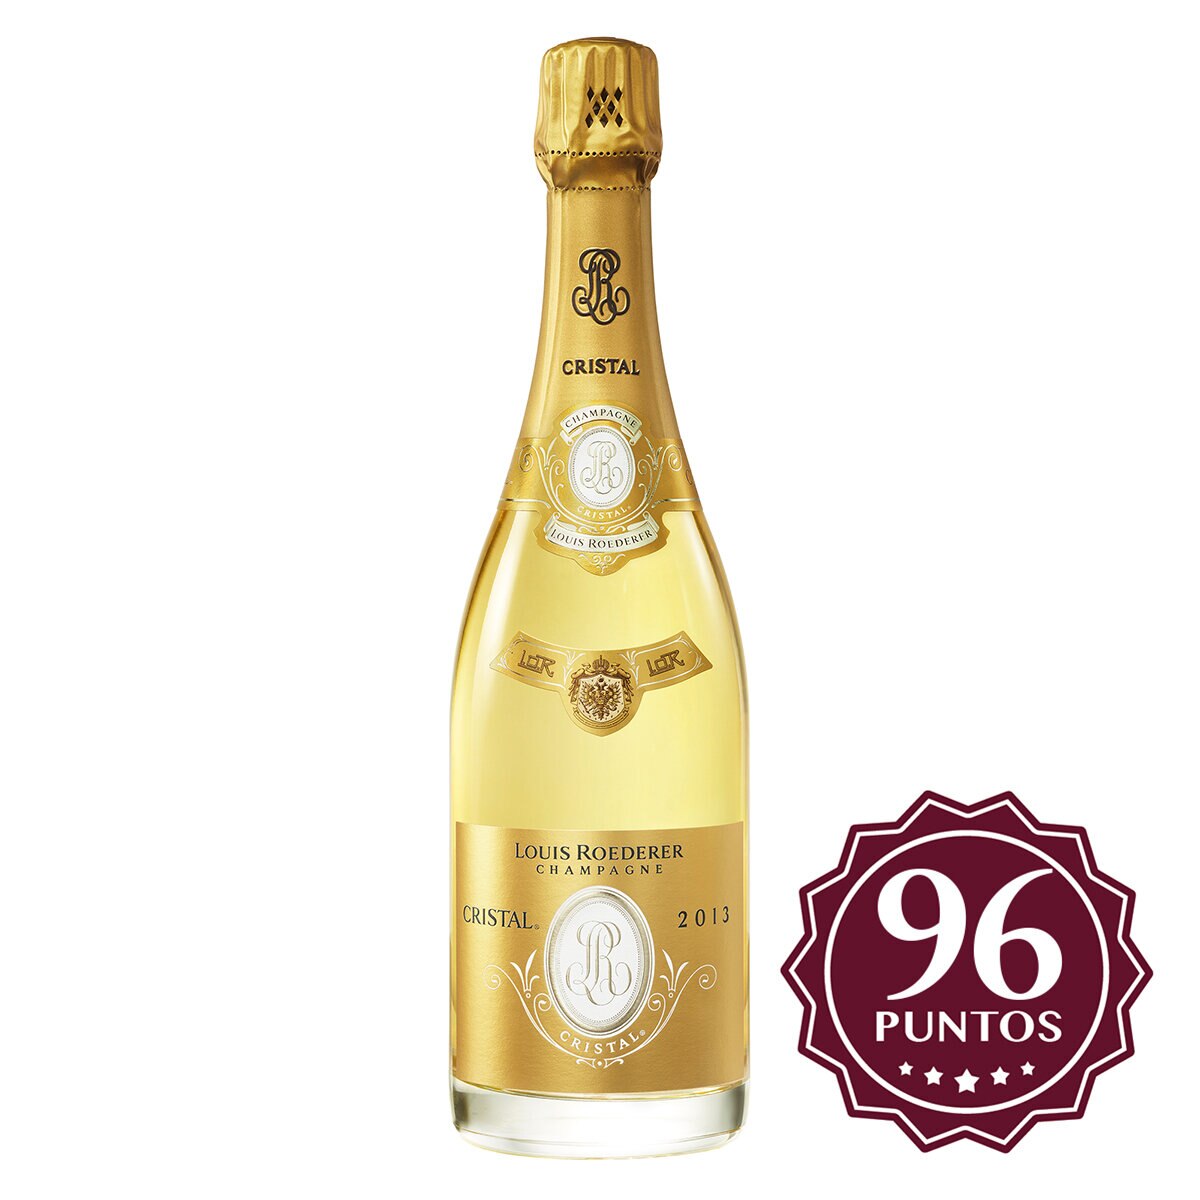 Champagne Louis Roederer Cristal 2013 750ml